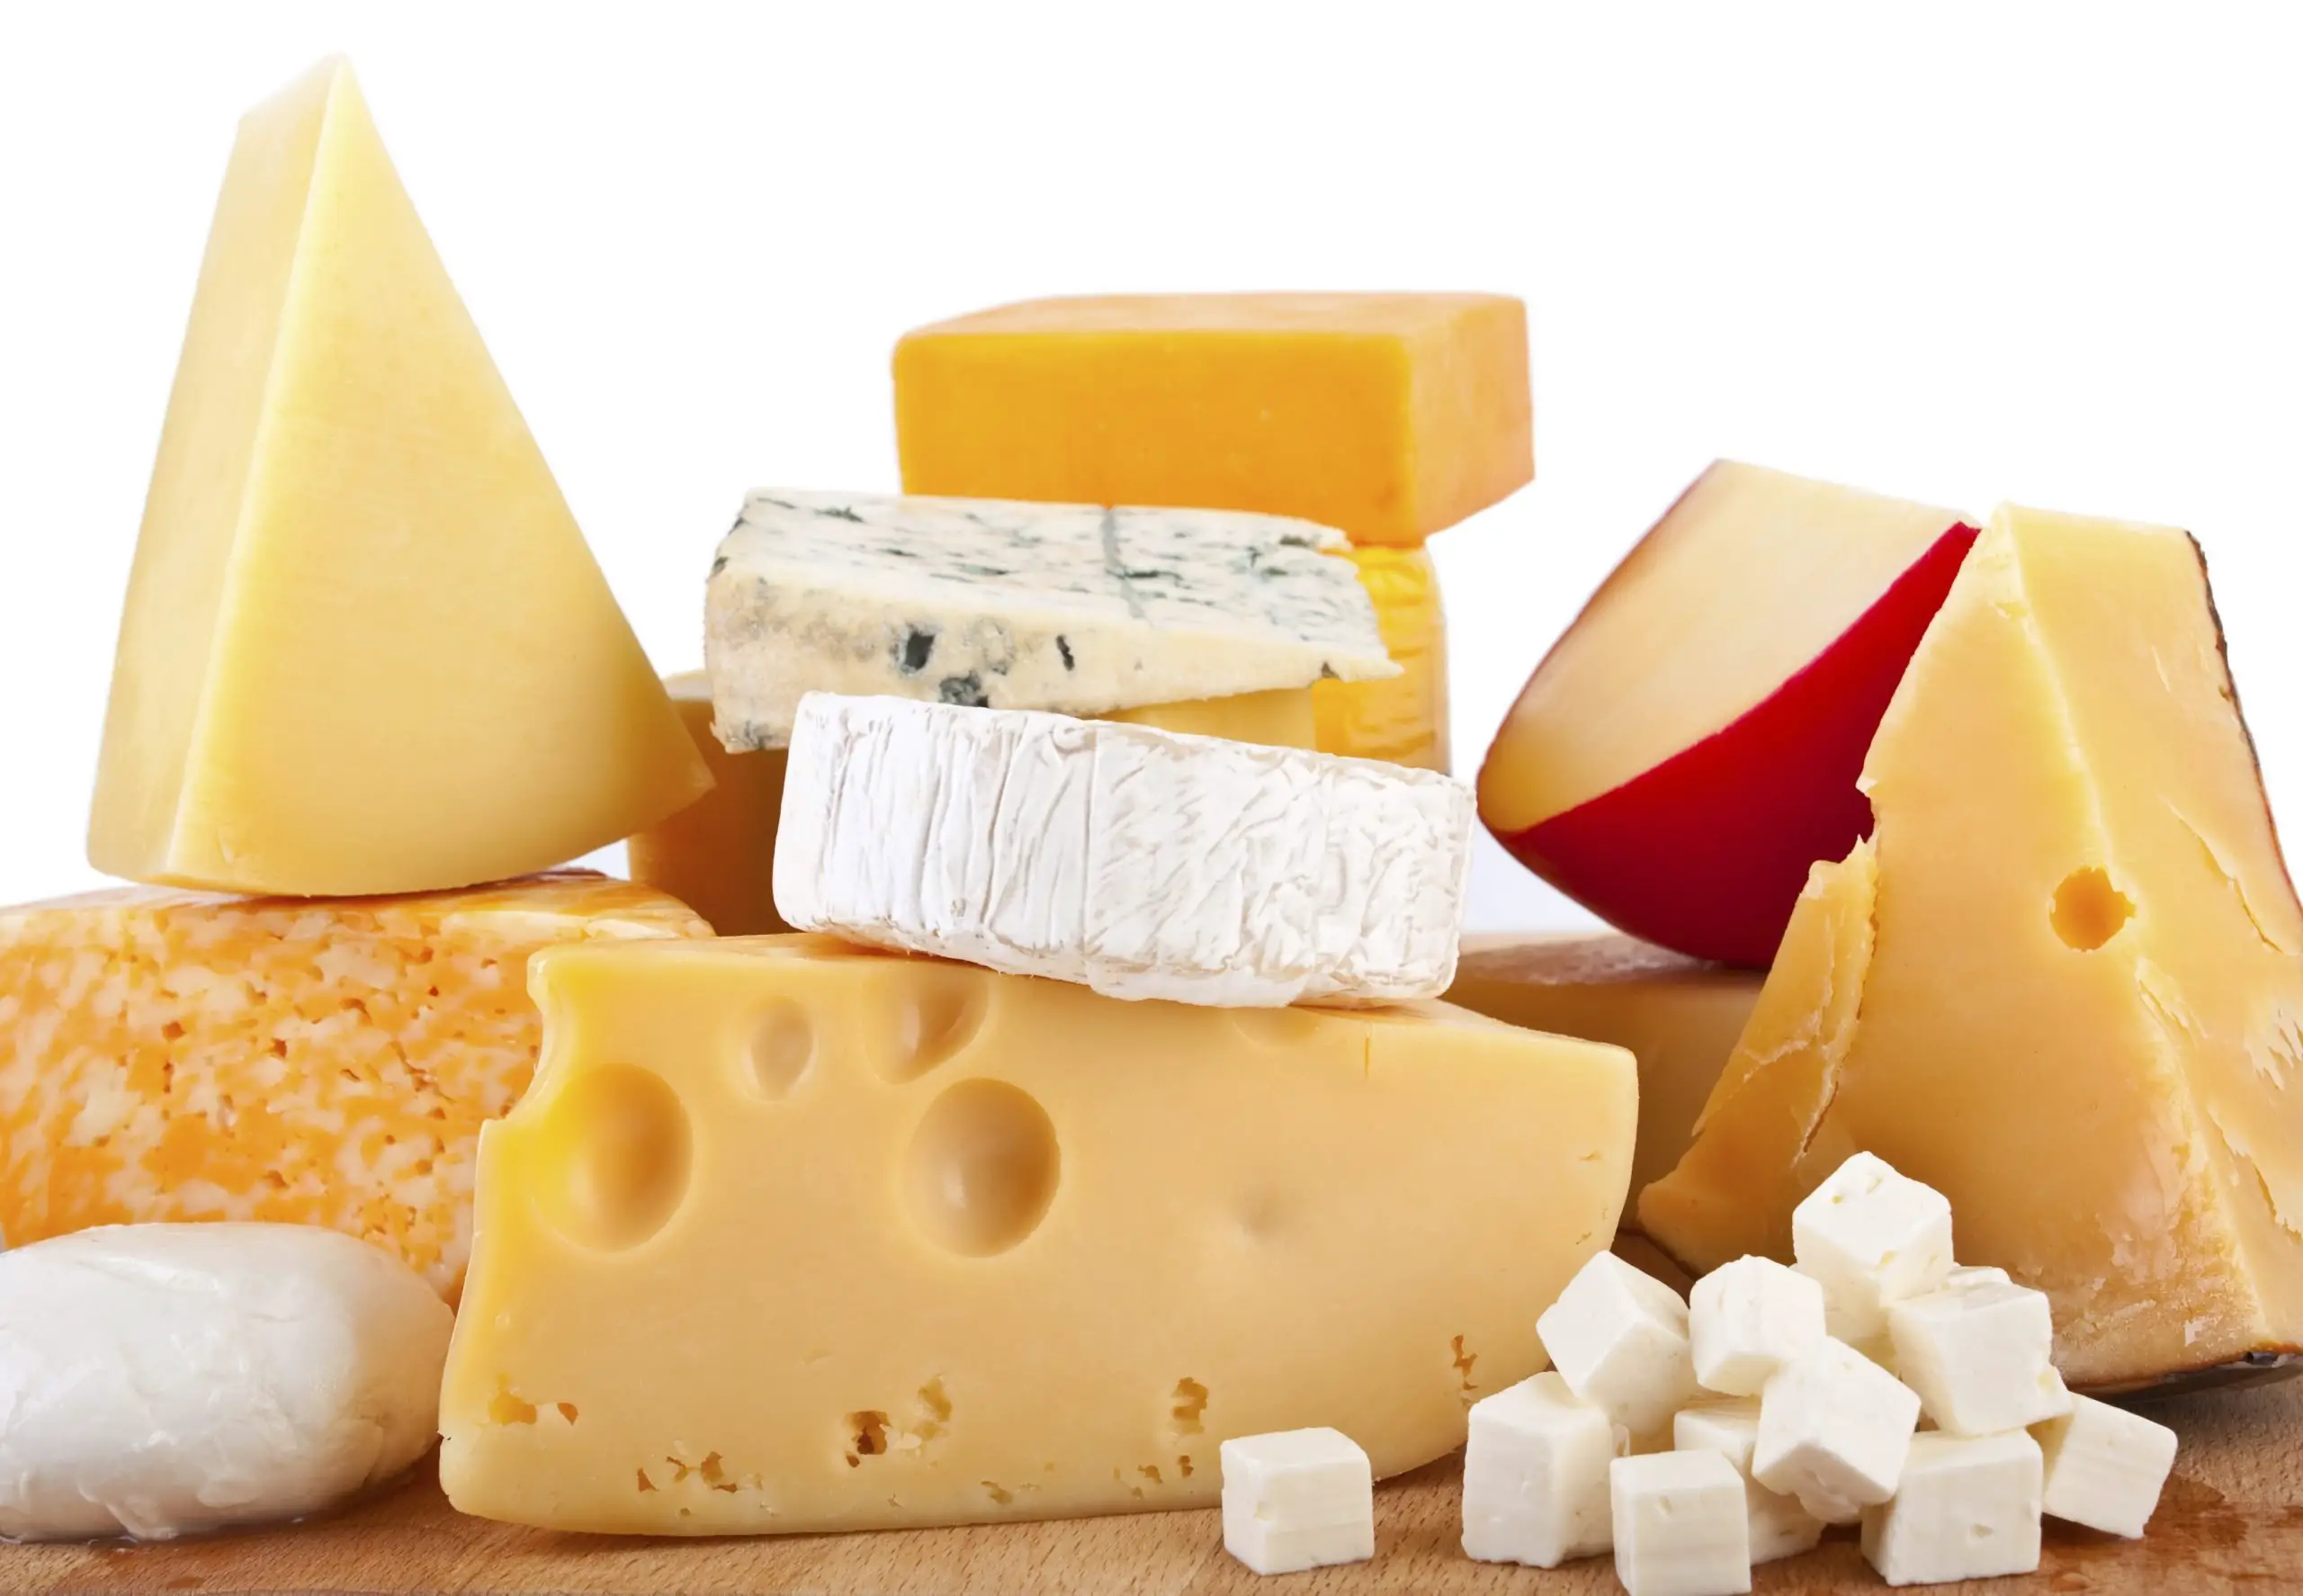 Where to buy cheese in Beijing?